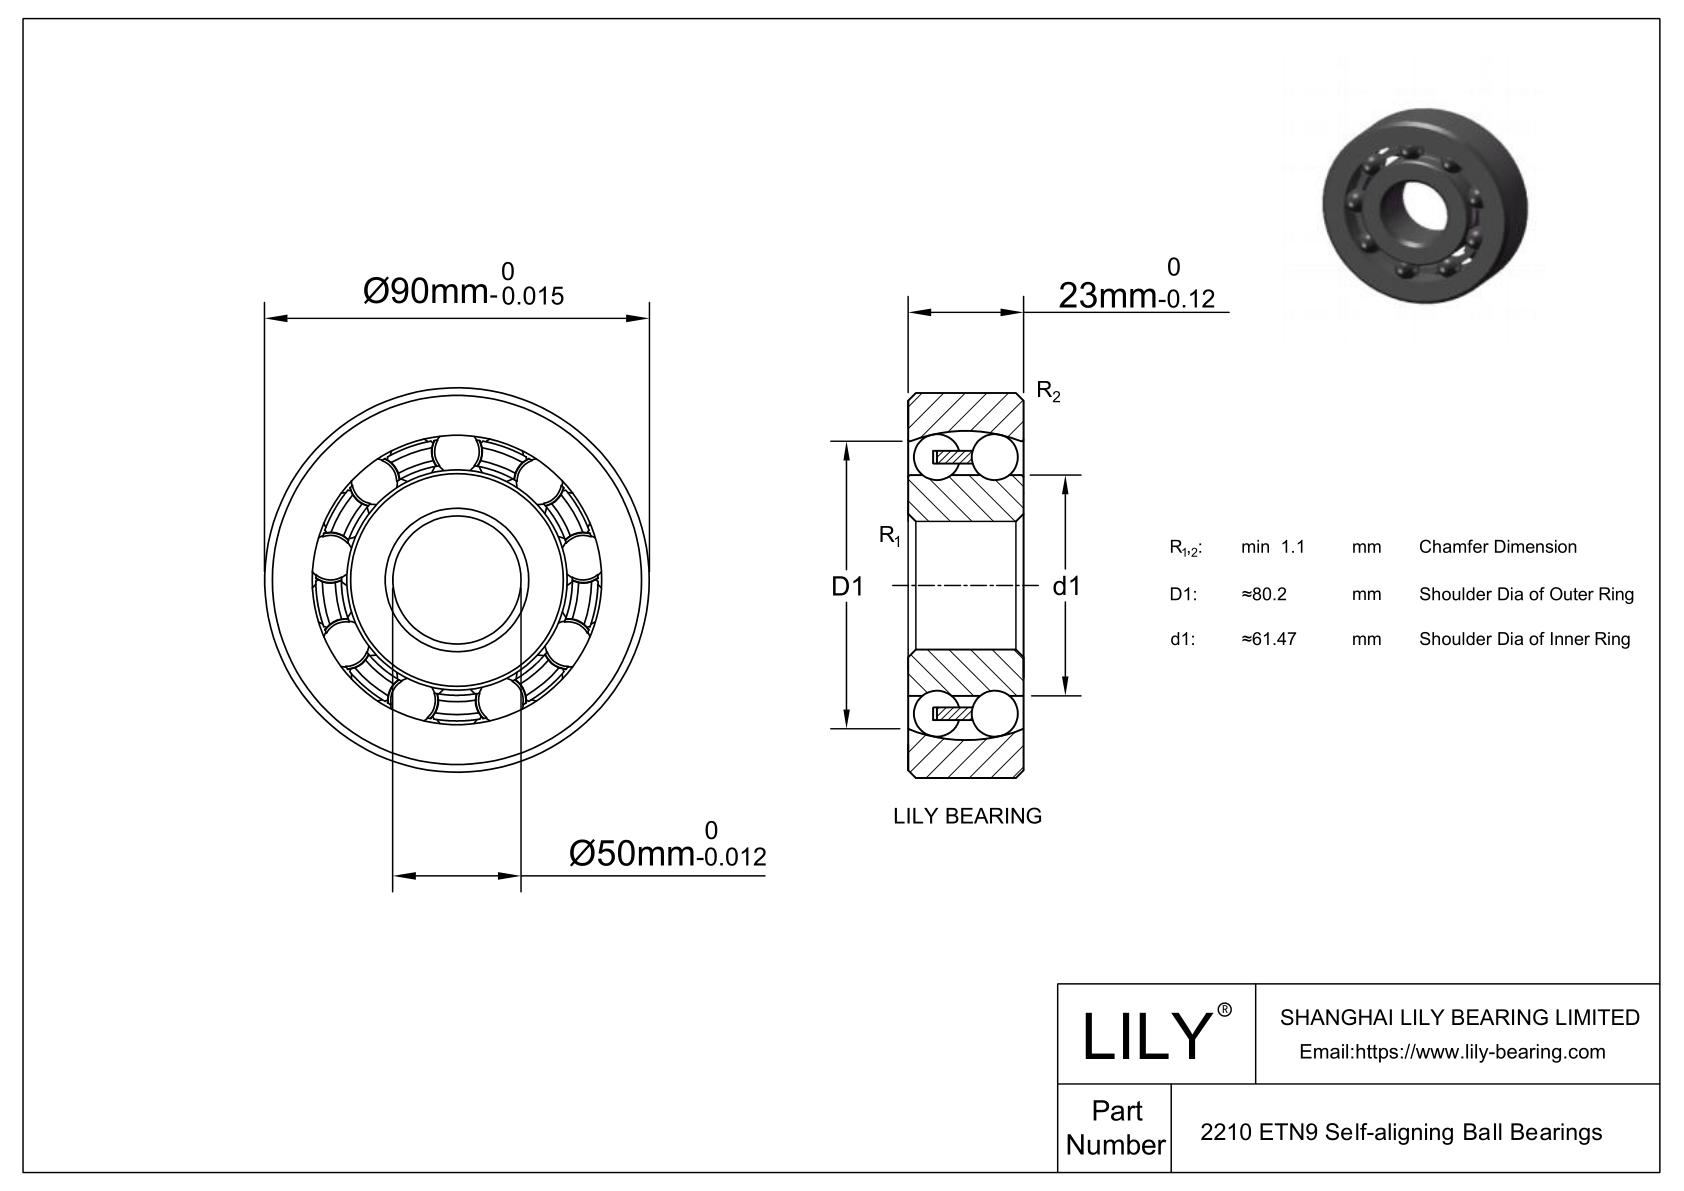 S2210 ETN9 Stainless Steel Self Aligning Ball Bearings cad drawing